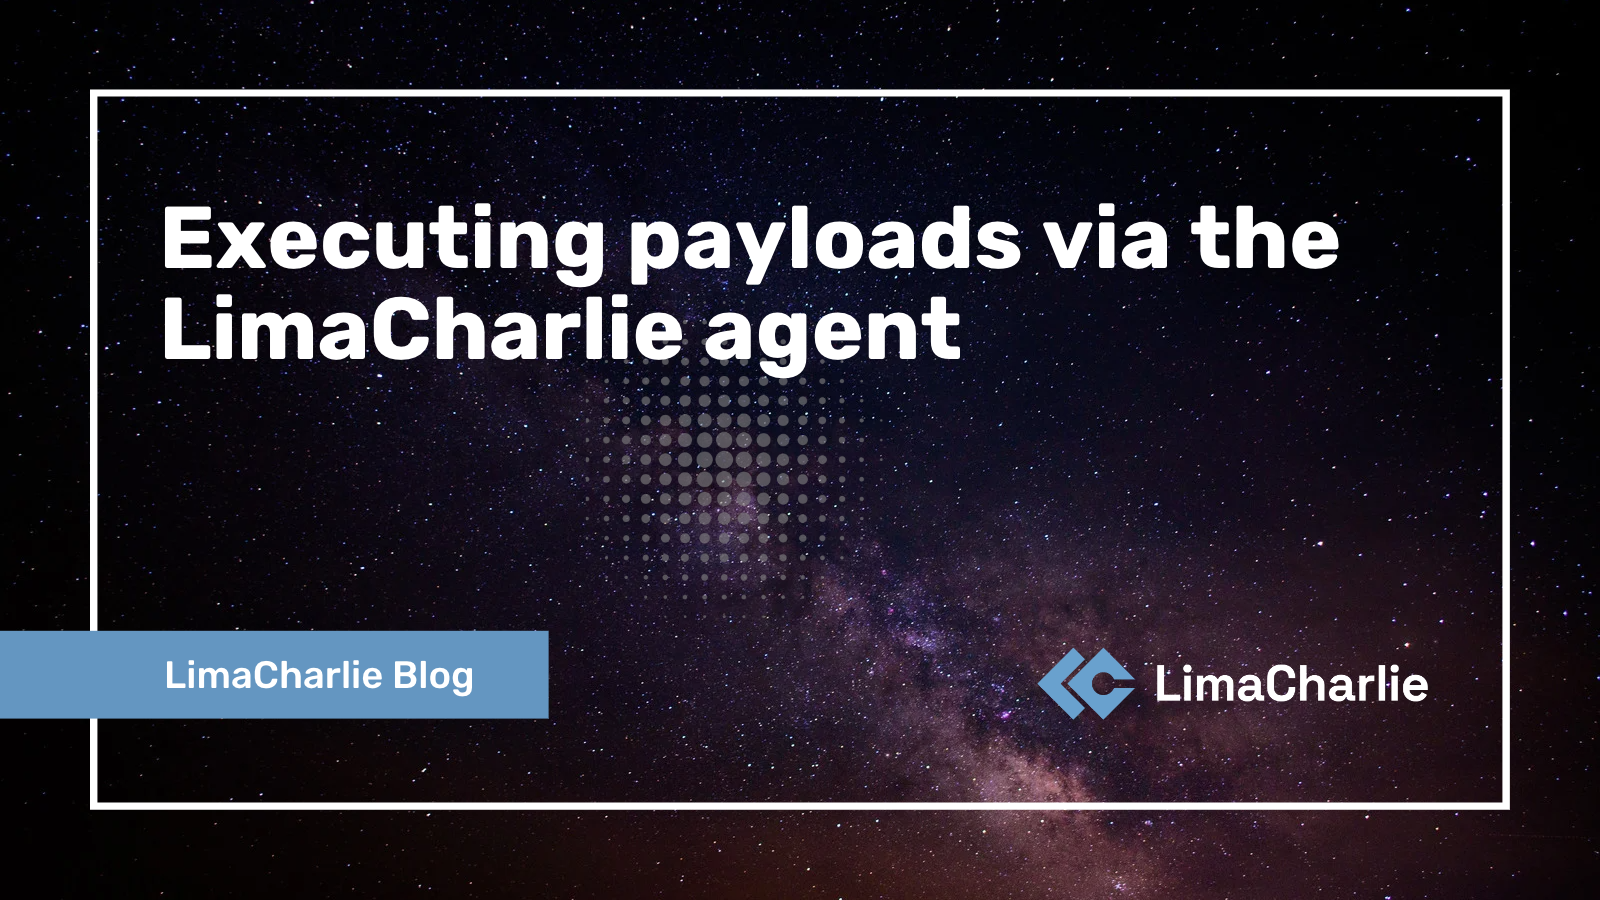 Executing payloads via the LimaCharlie agent